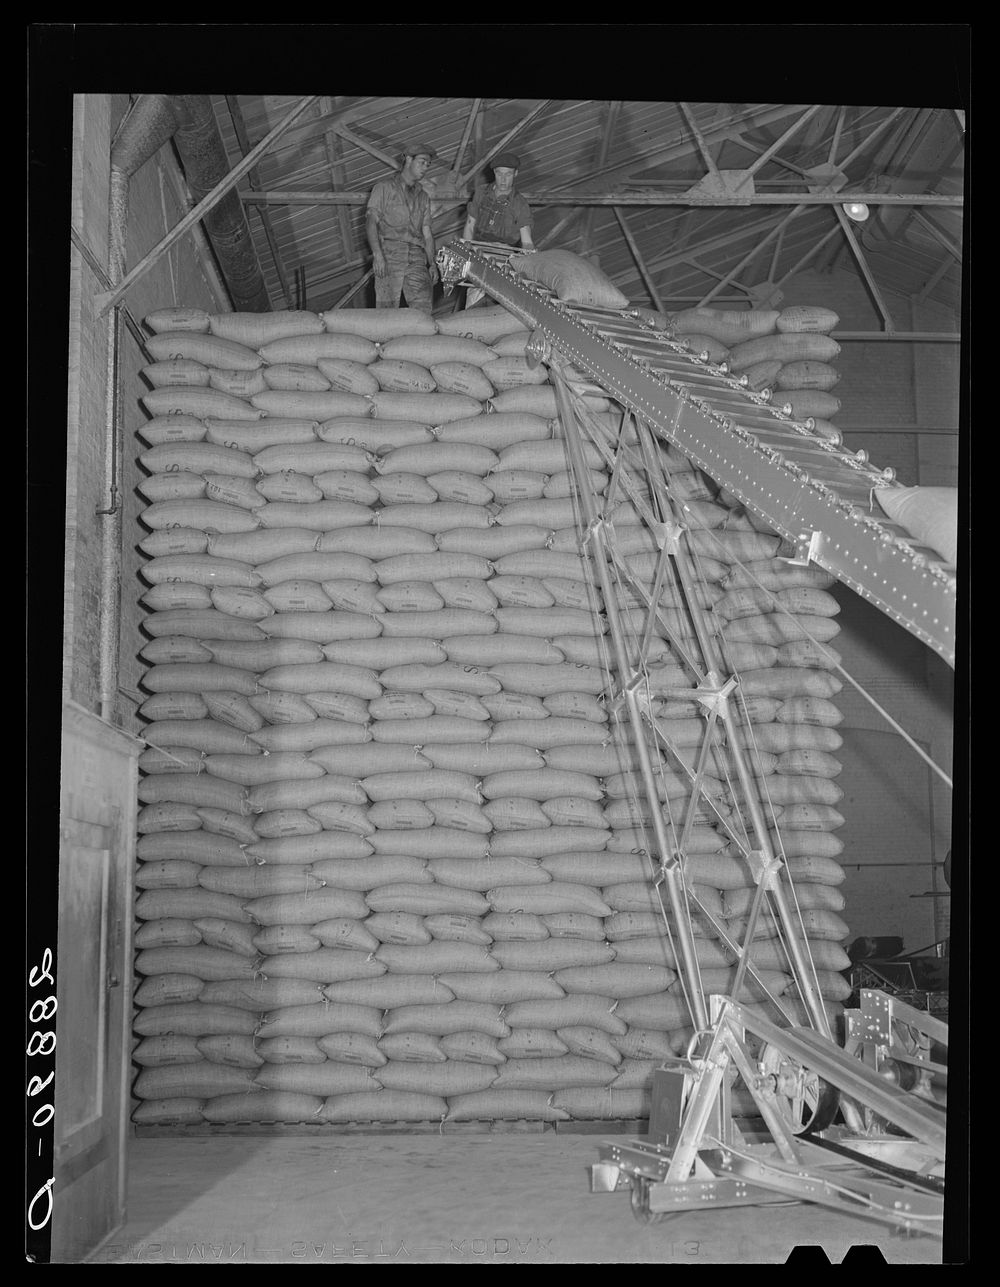 Storing bags of sugar at beet factory, Brighton, Colorado. Sourced from the Library of Congress.